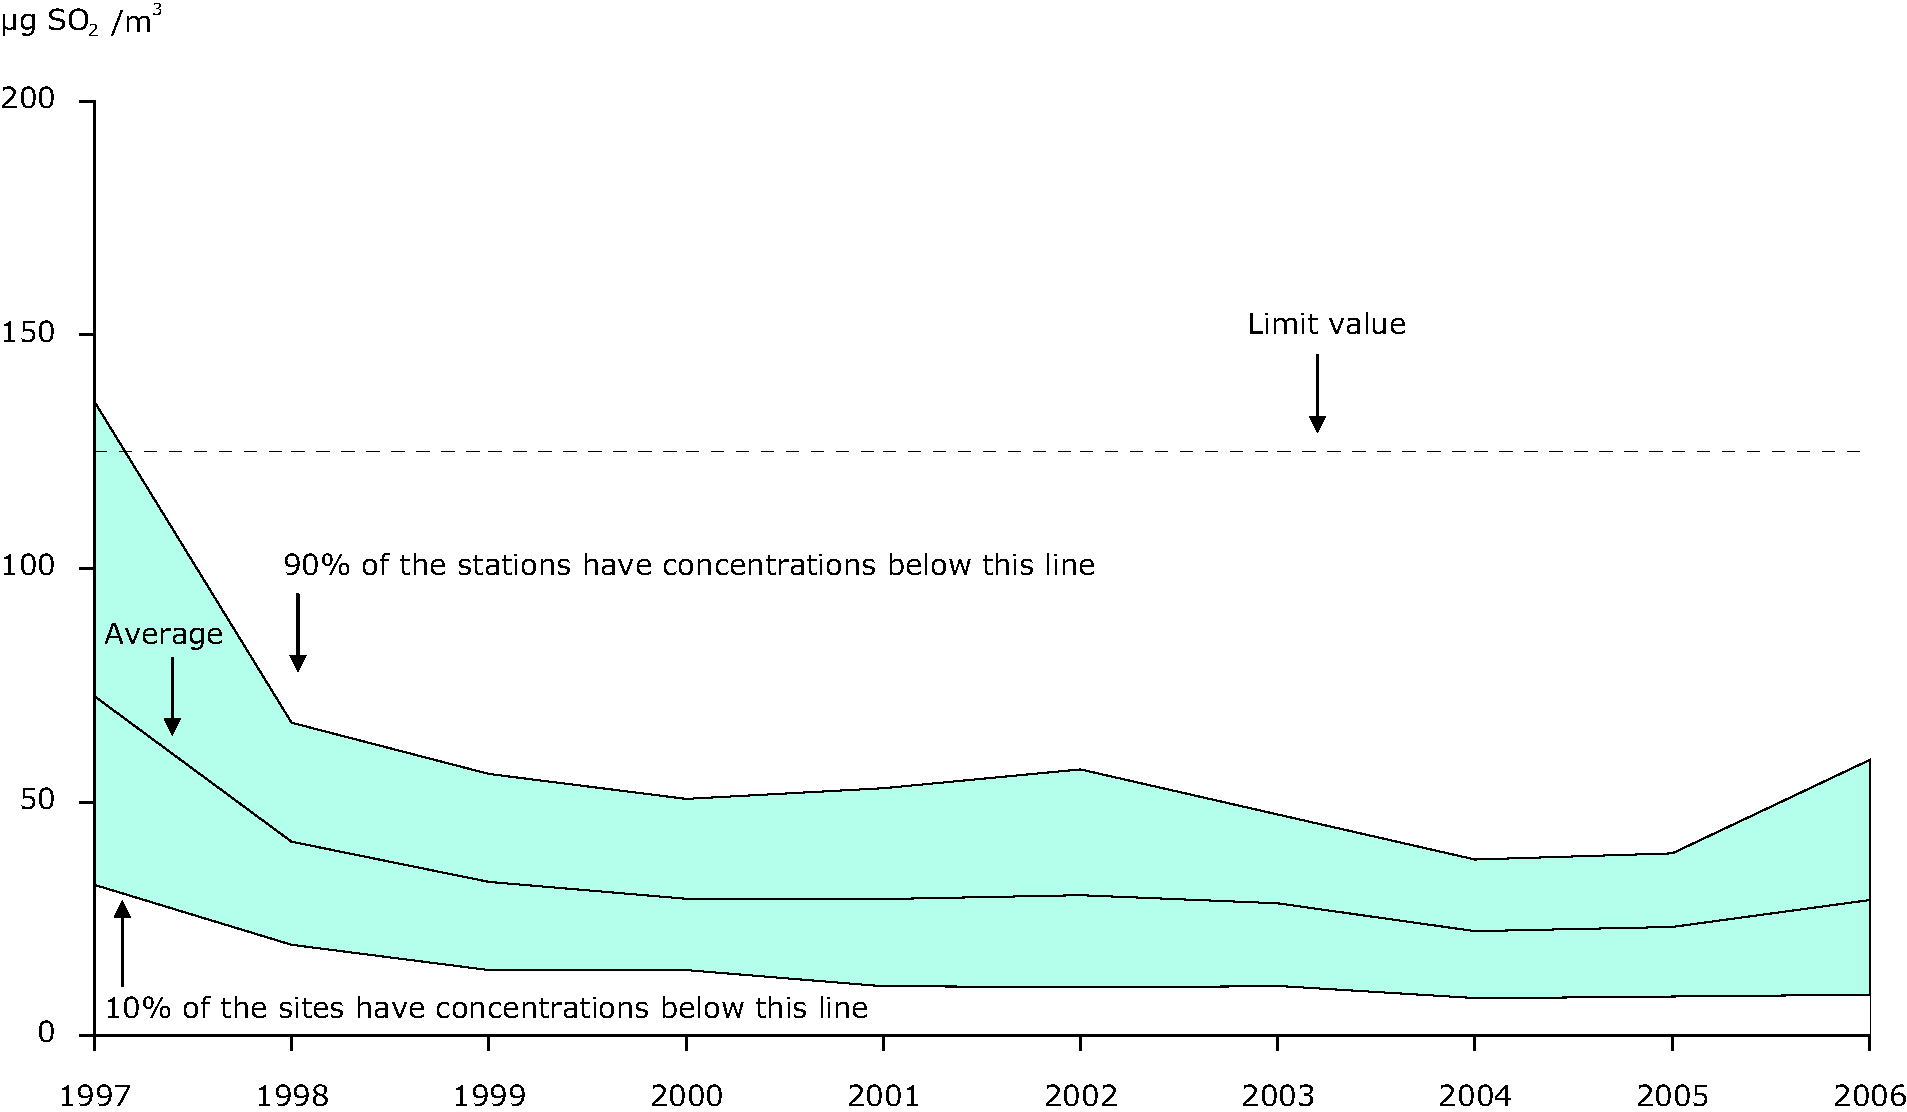 4th highest 24-hour SO2 concentration averaged through available urban background stations, EEA member countries, 1997-2006